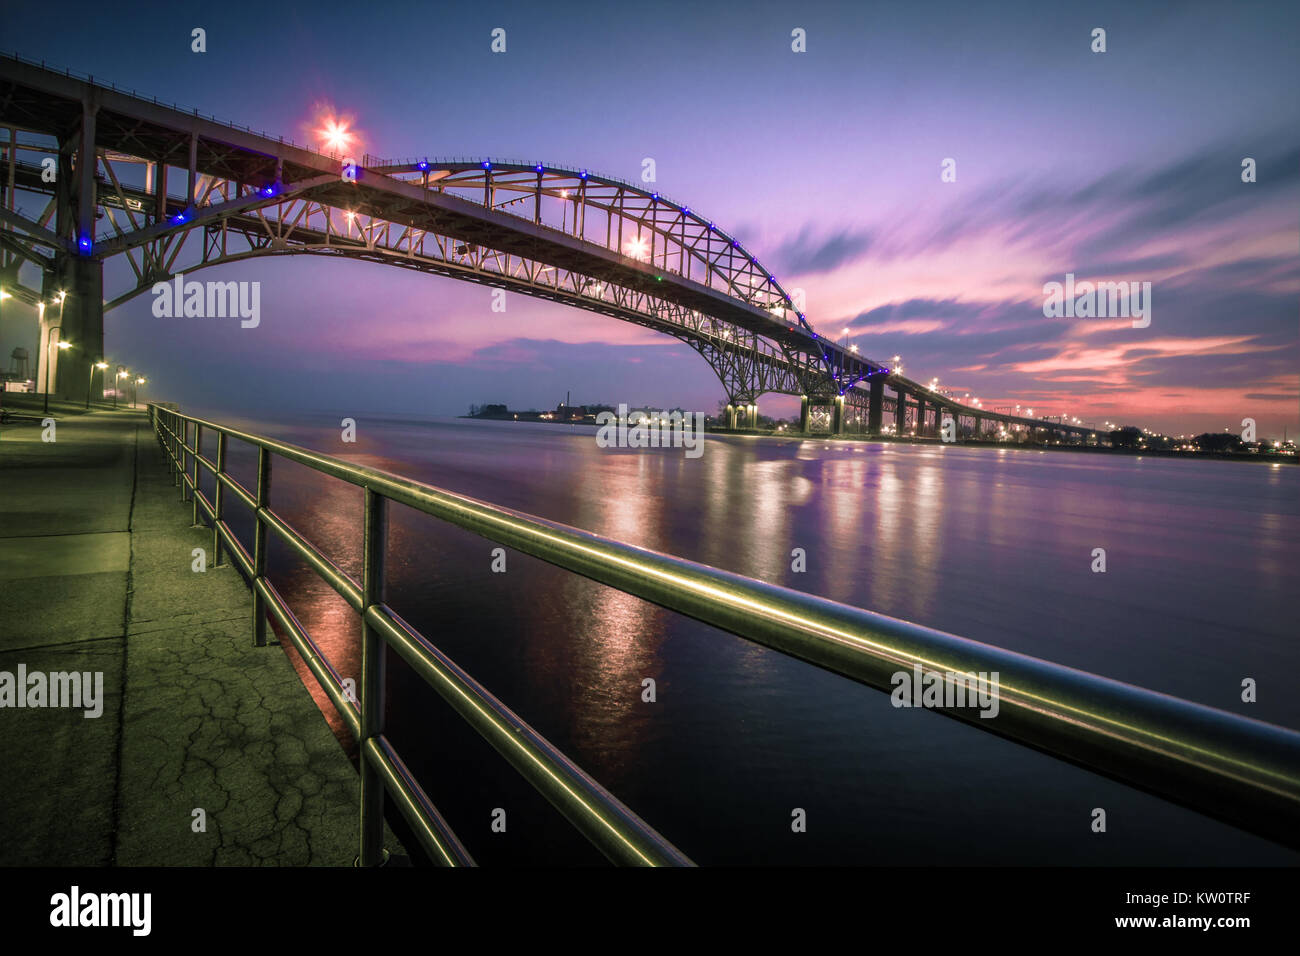 Blue Water Bridge Panorama. The waterfront district of Port Huron, Michigan with the Blue Water Bridge. The Bridge connects the USA and Canada. Stock Photo